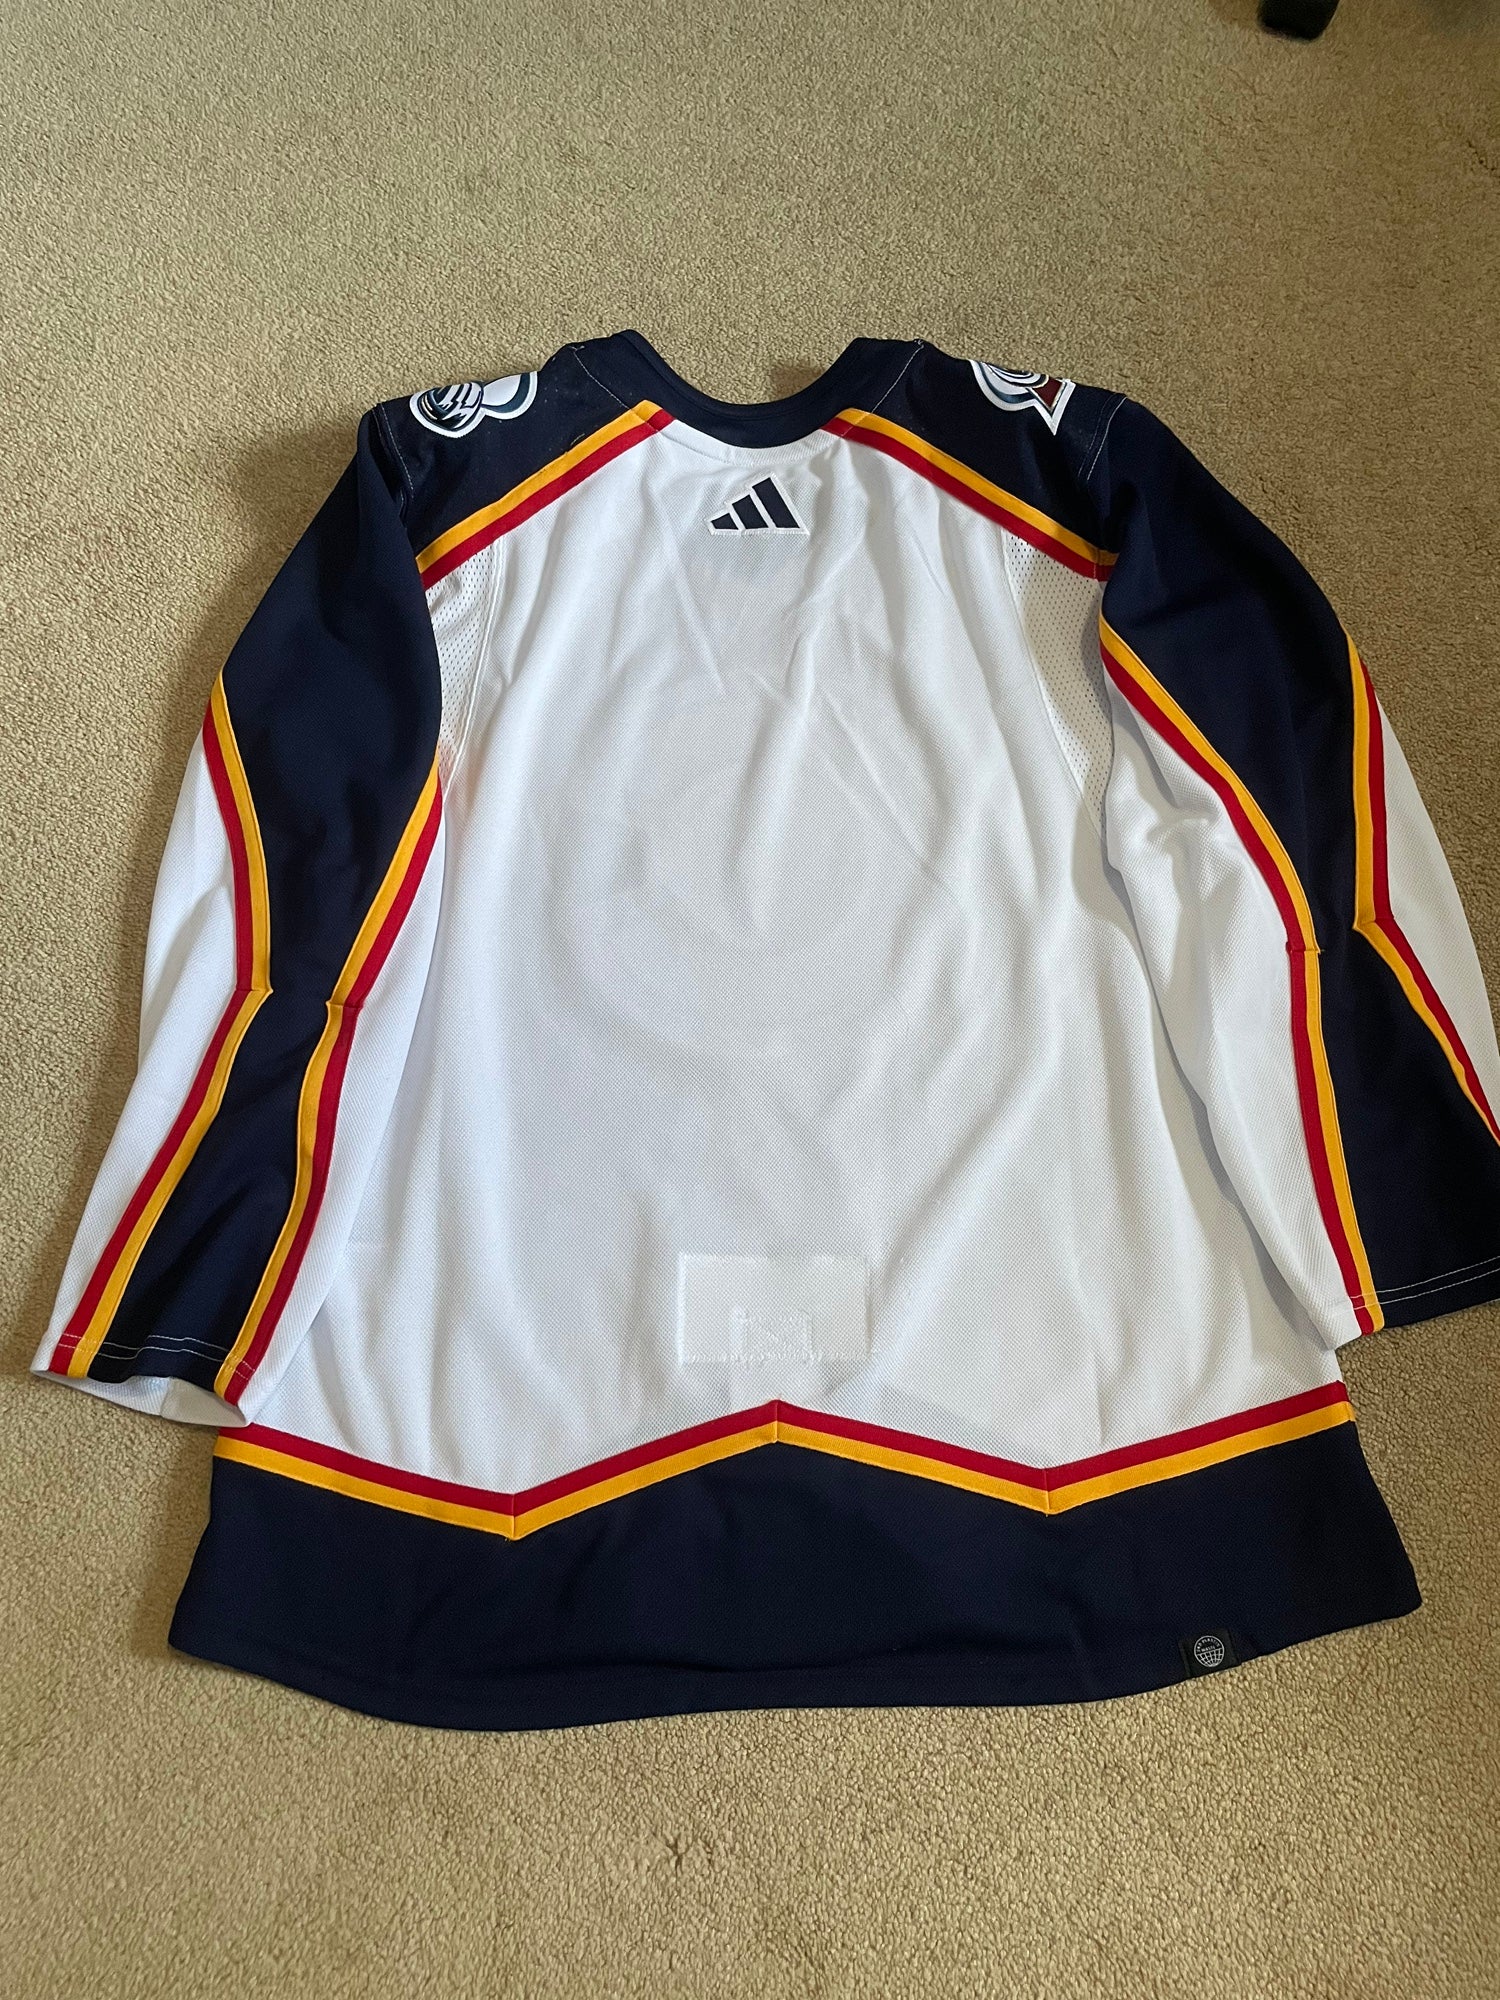 Adidas+NHL+Authentic+Colorado+Avalanche+Reverse+Retro+Jersey+Small+46+Nordique  for sale online